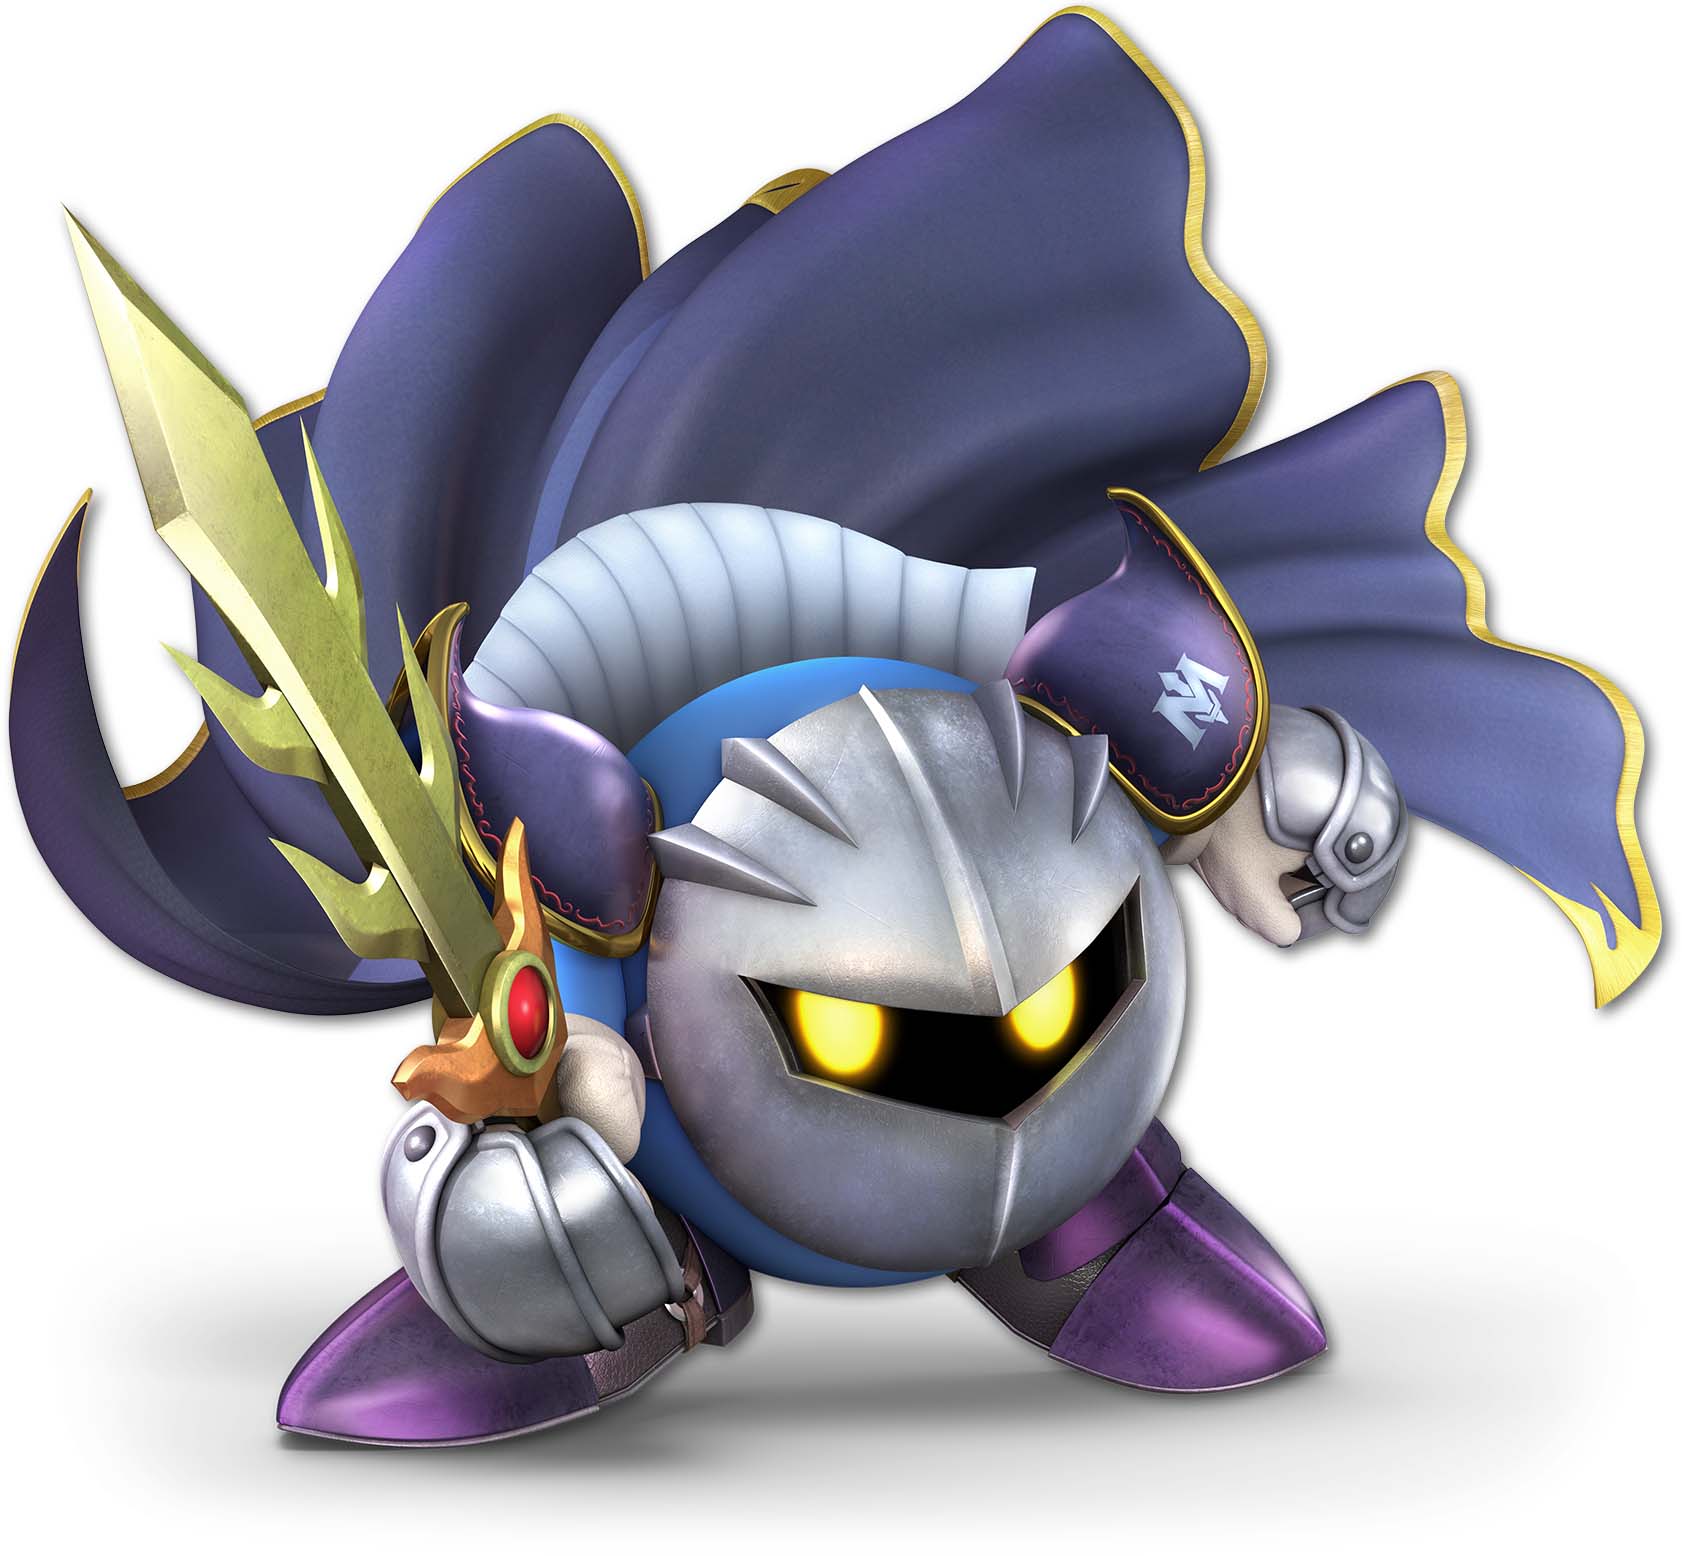 How to counter Meta Knight with Piranha Plant in Super Smash Bros. Ultimate